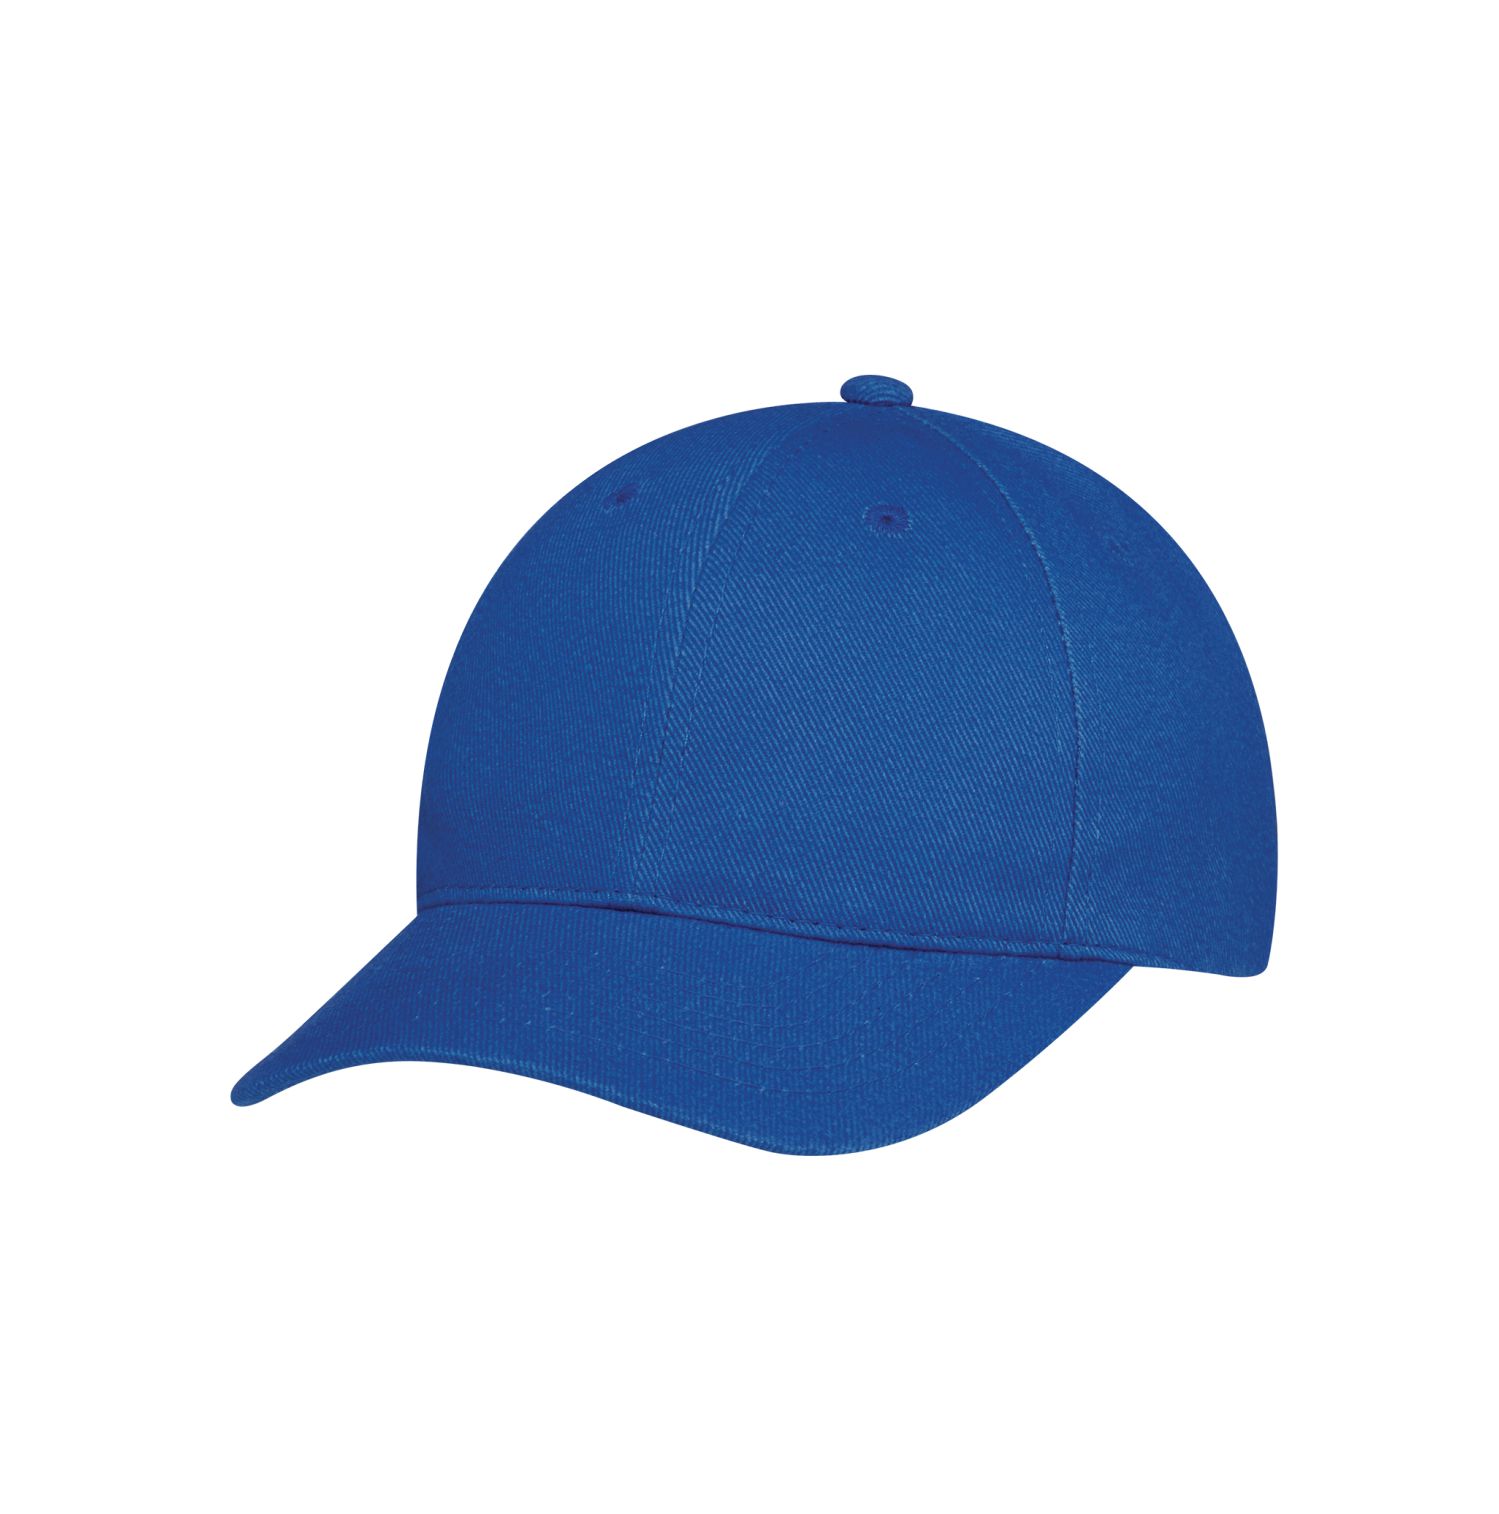 AJM Heavyweight Brushed Cotton Drill 6 Panel Constructed Contour Hat #2C390M Royal Blue